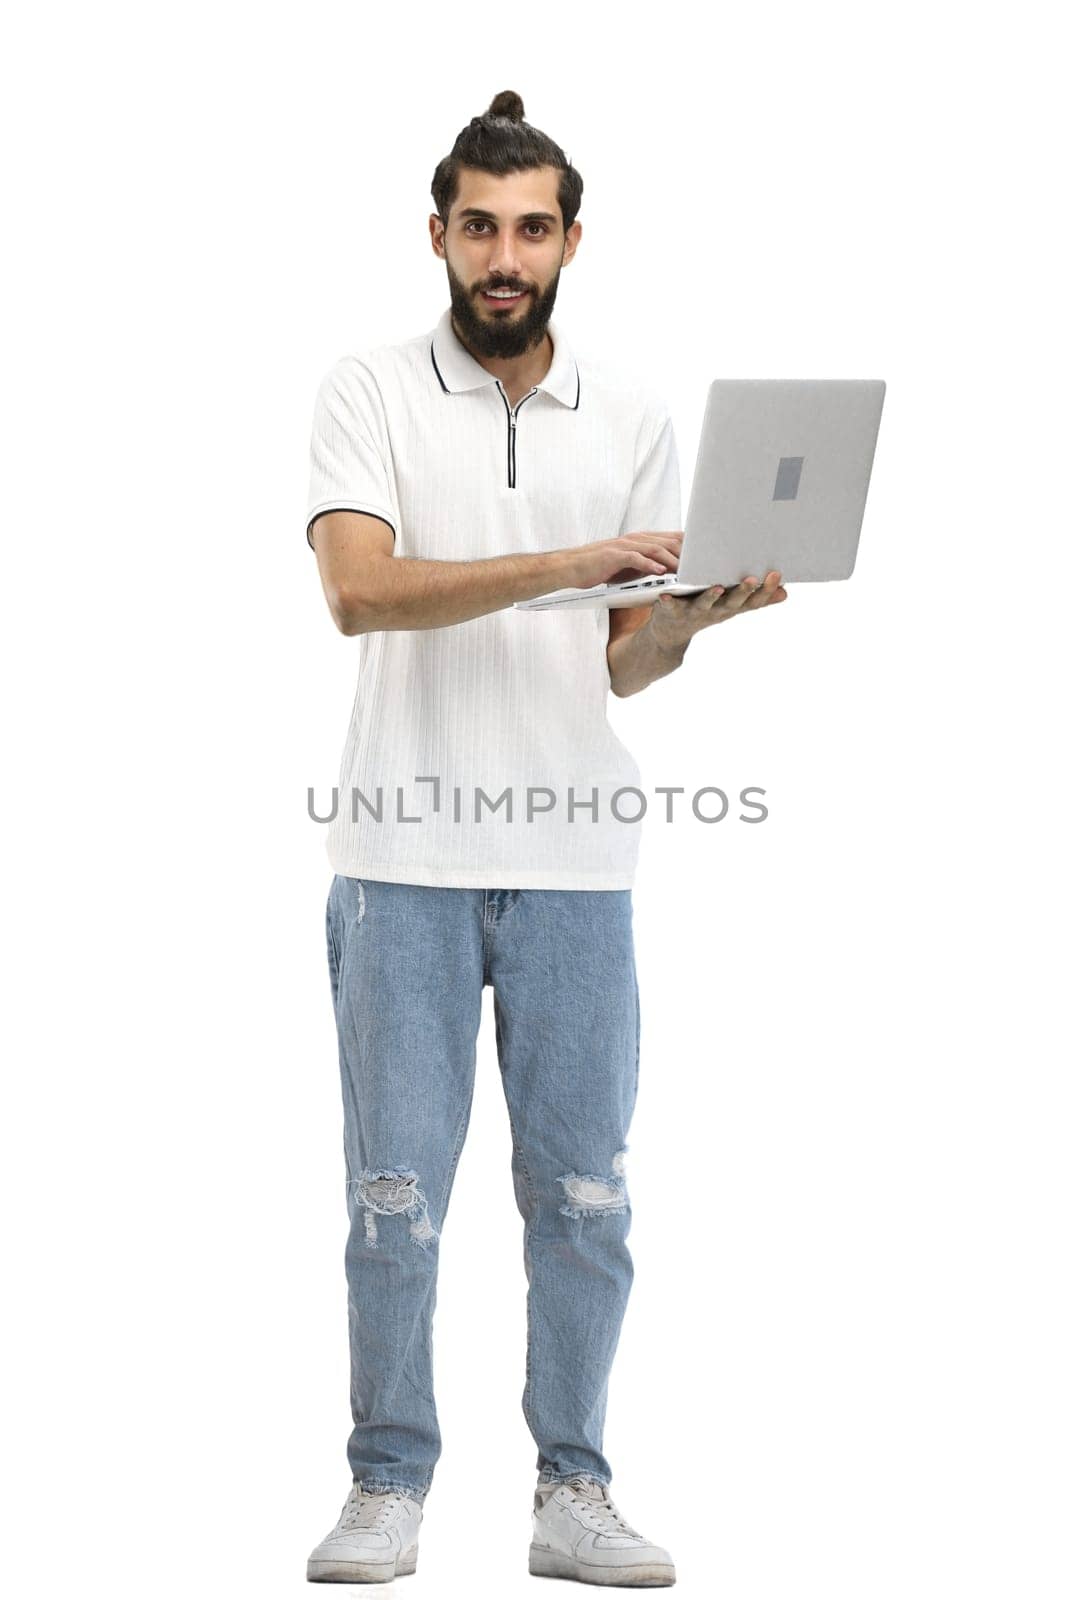 A man, full-length, on a white background, with a laptop.